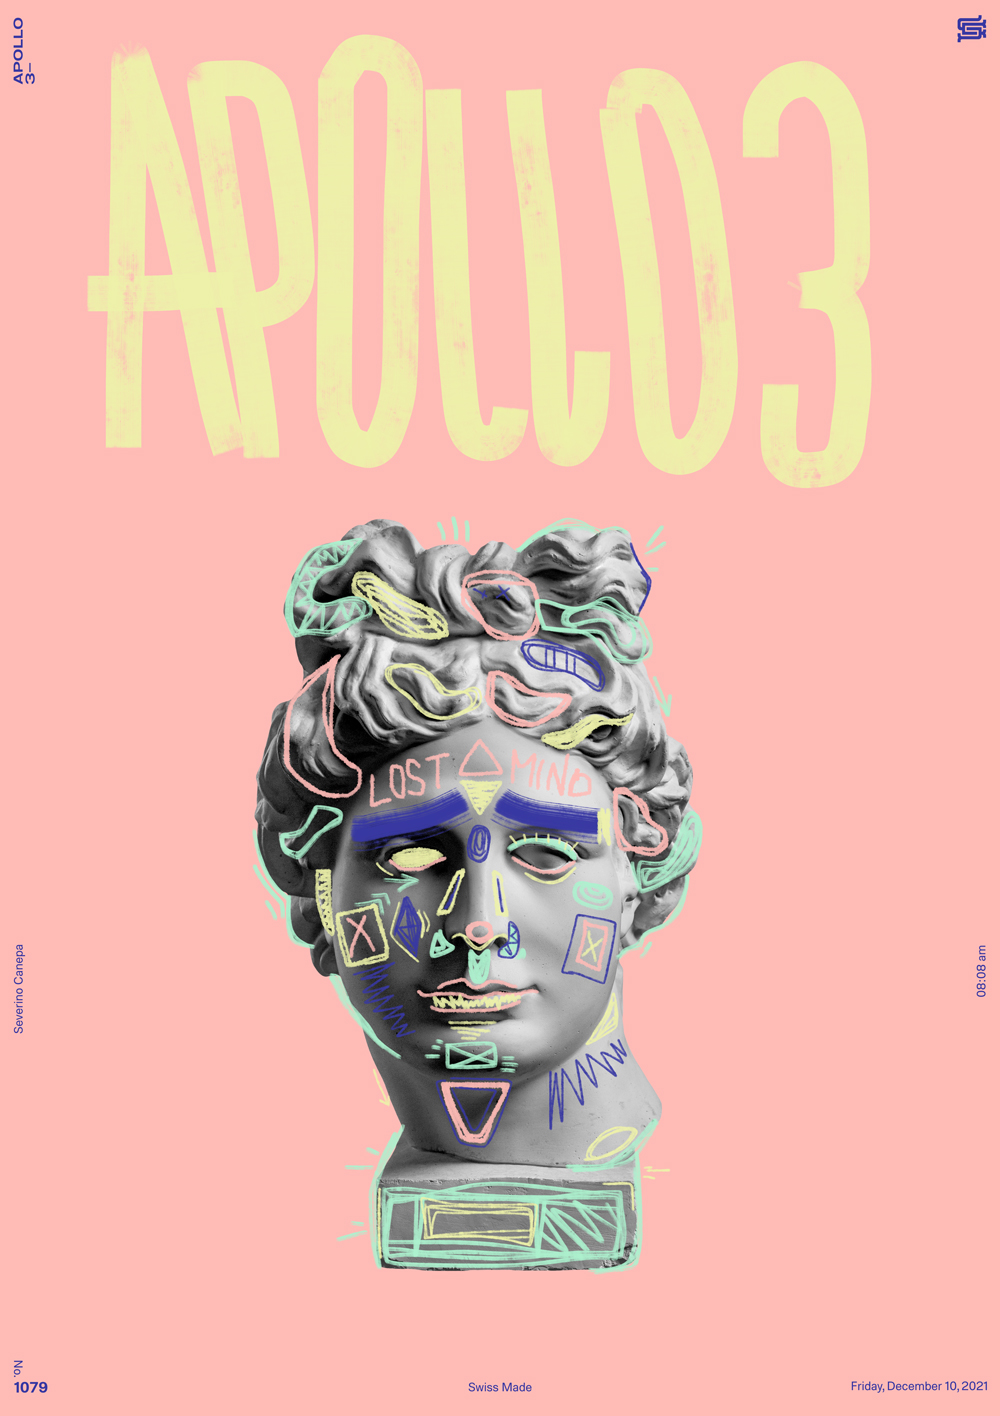 Fun hand drawn mix between brushes and the picture of Apollo